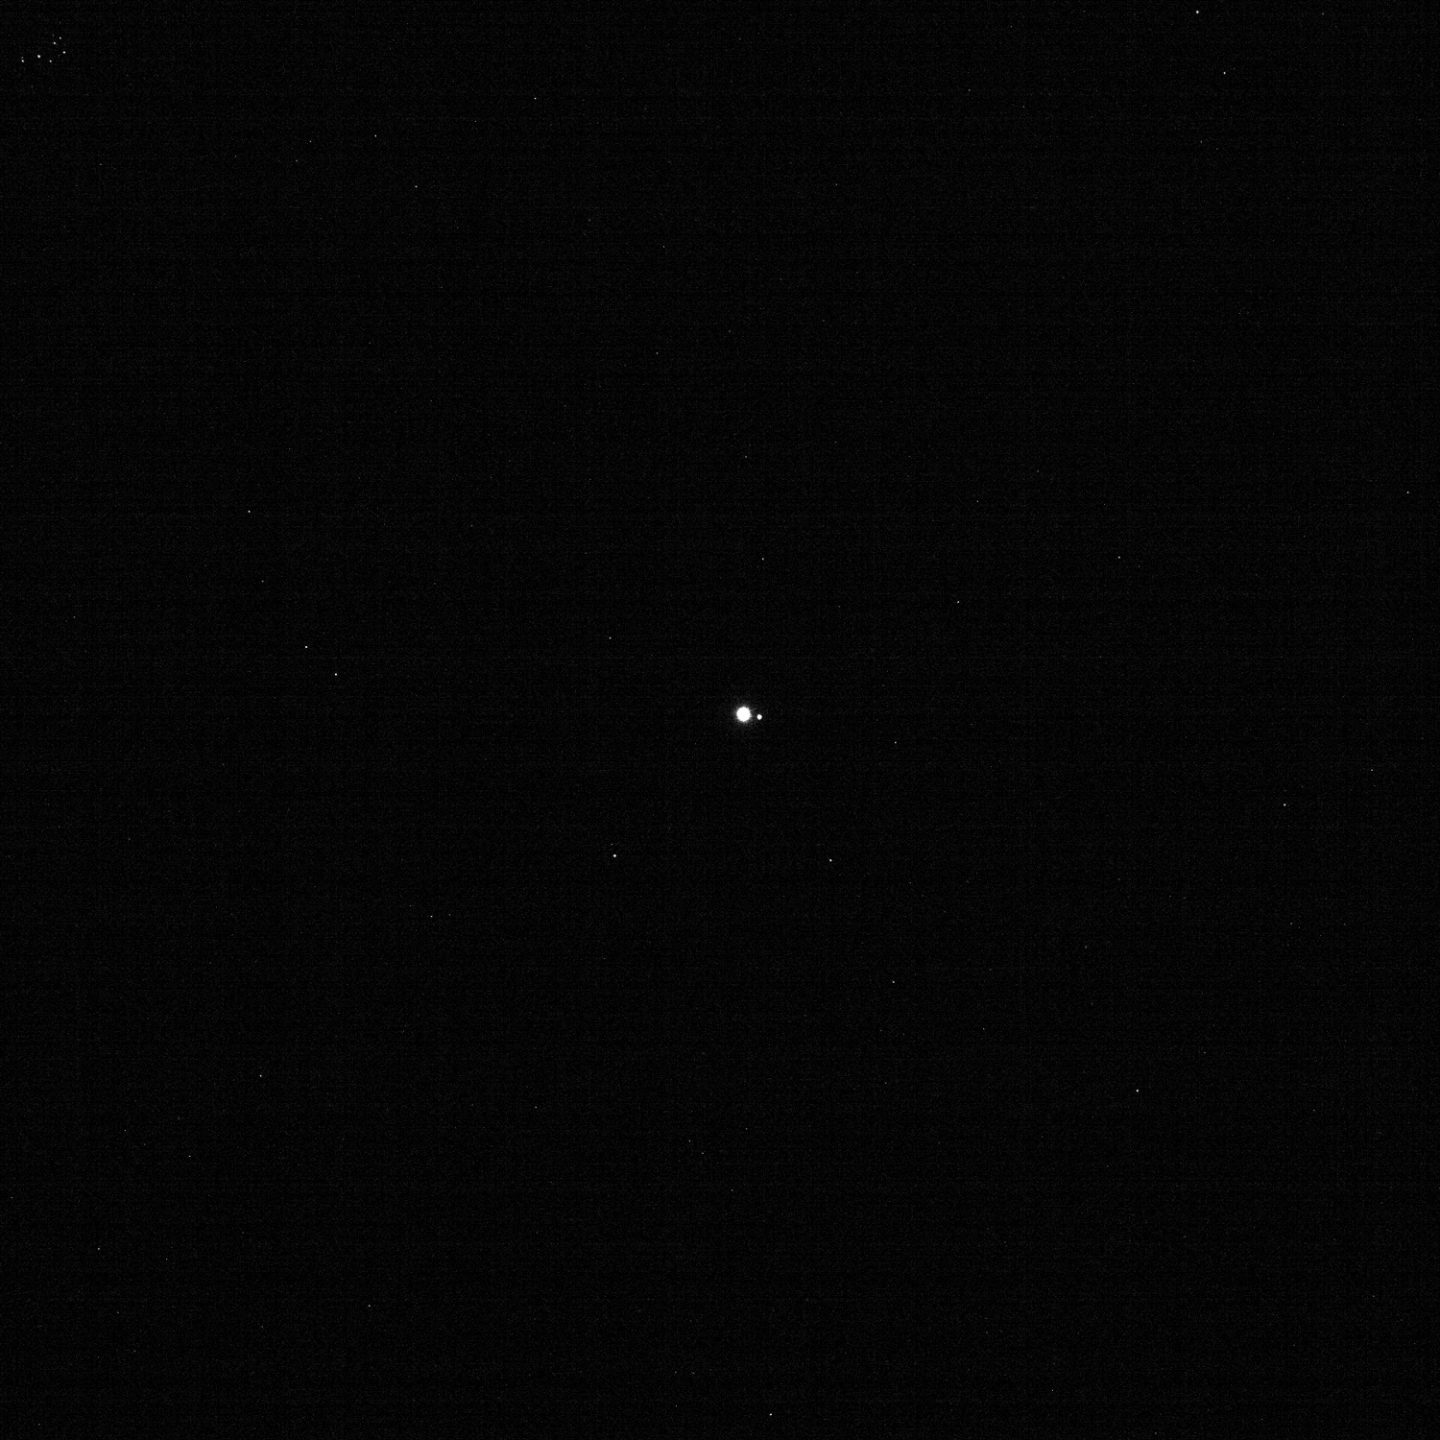 viewed from a distance of more than 60 million kilometres.